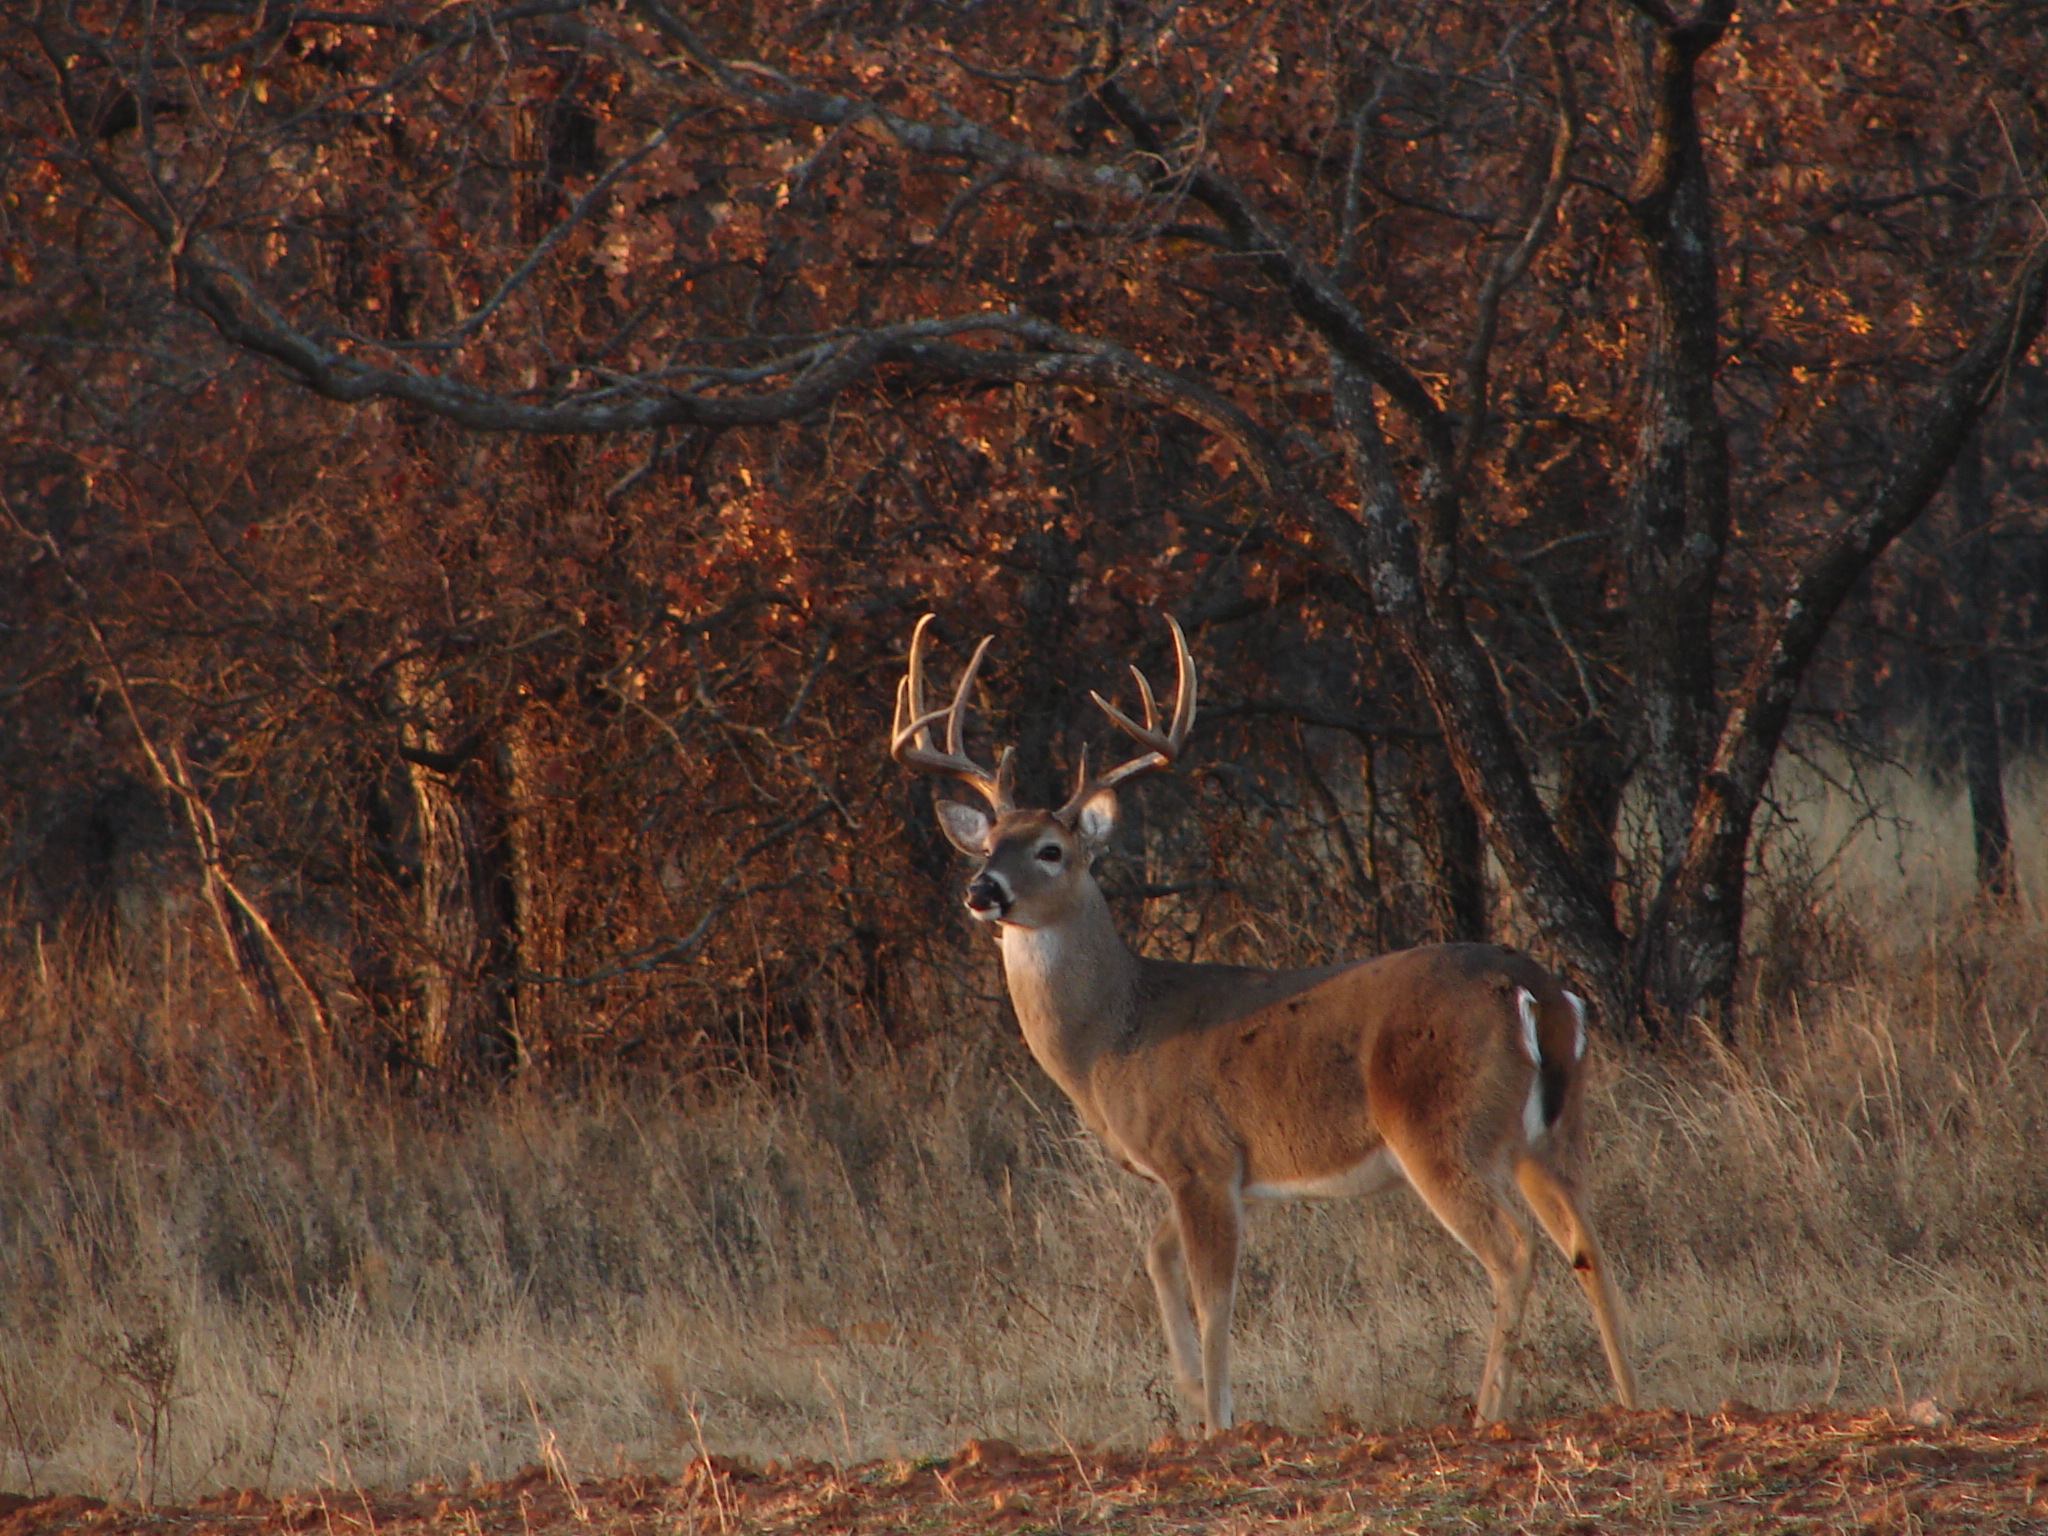  Deer Hunting Forums Thread Cool Pics Age And Desktop Wallpaper